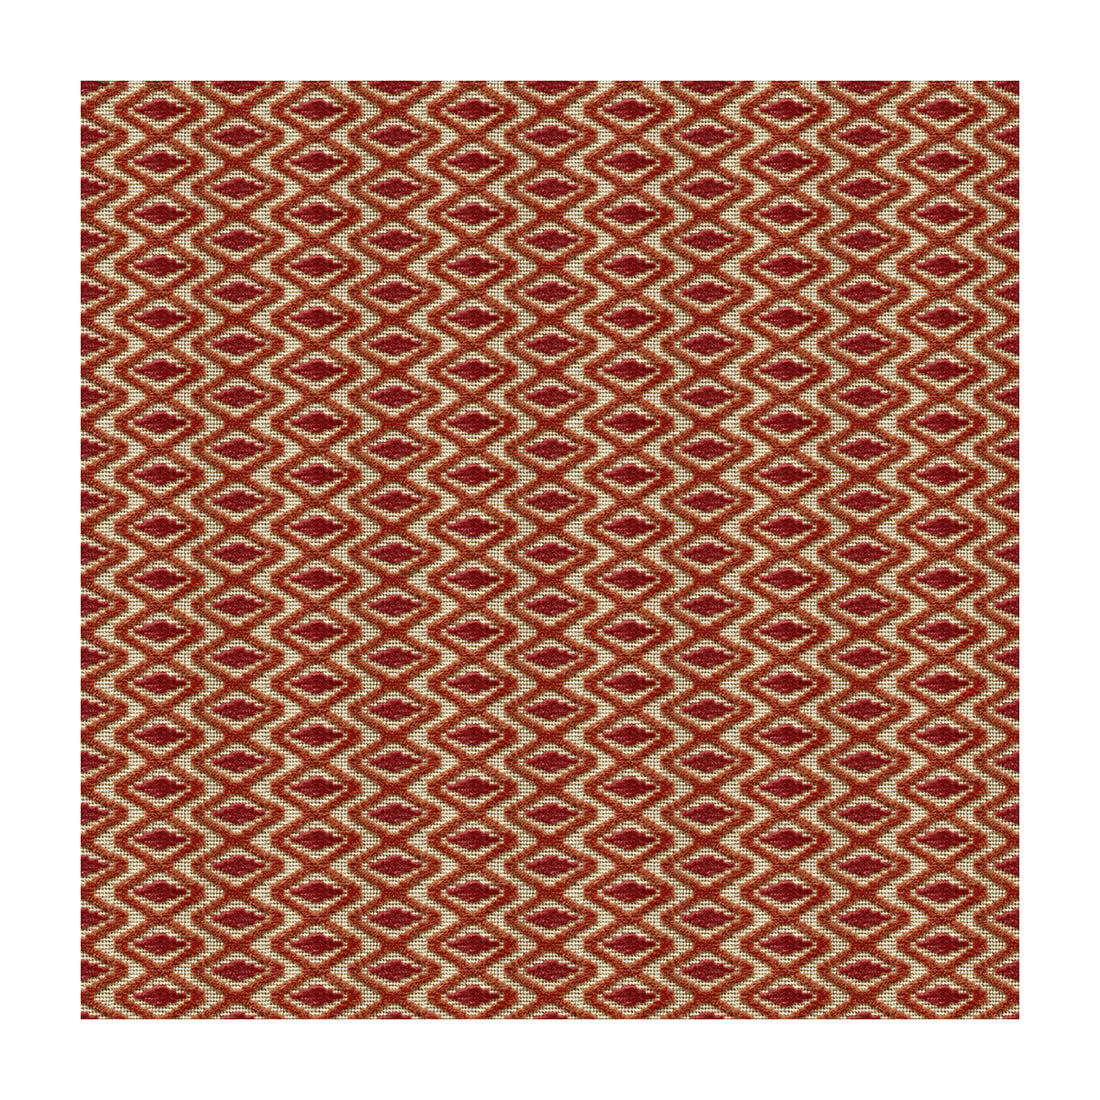 Otto Trellis fabric in spice/red color - pattern 2015119.229.0 - by Lee Jofa in the Parish-Hadley collection